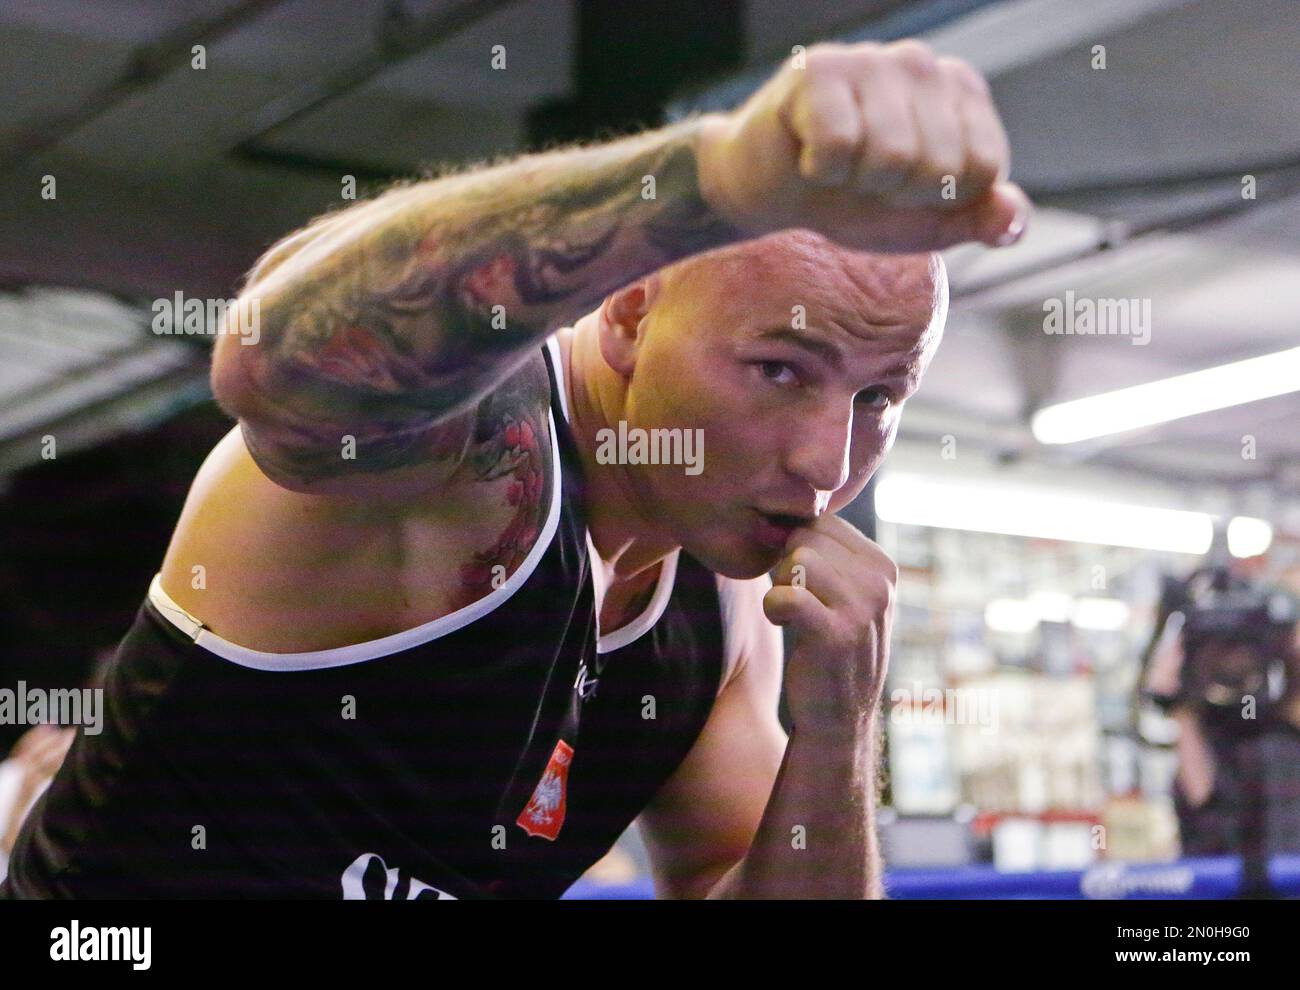 Artur Szpilka, of Poland, works out before an upcoming WBC World  heavyweight title boxing match against Deontay Wilder, Tuesday, Jan. 12,  2016, in New York. (AP Photo/Frank Franklin II Stock Photo - Alamy